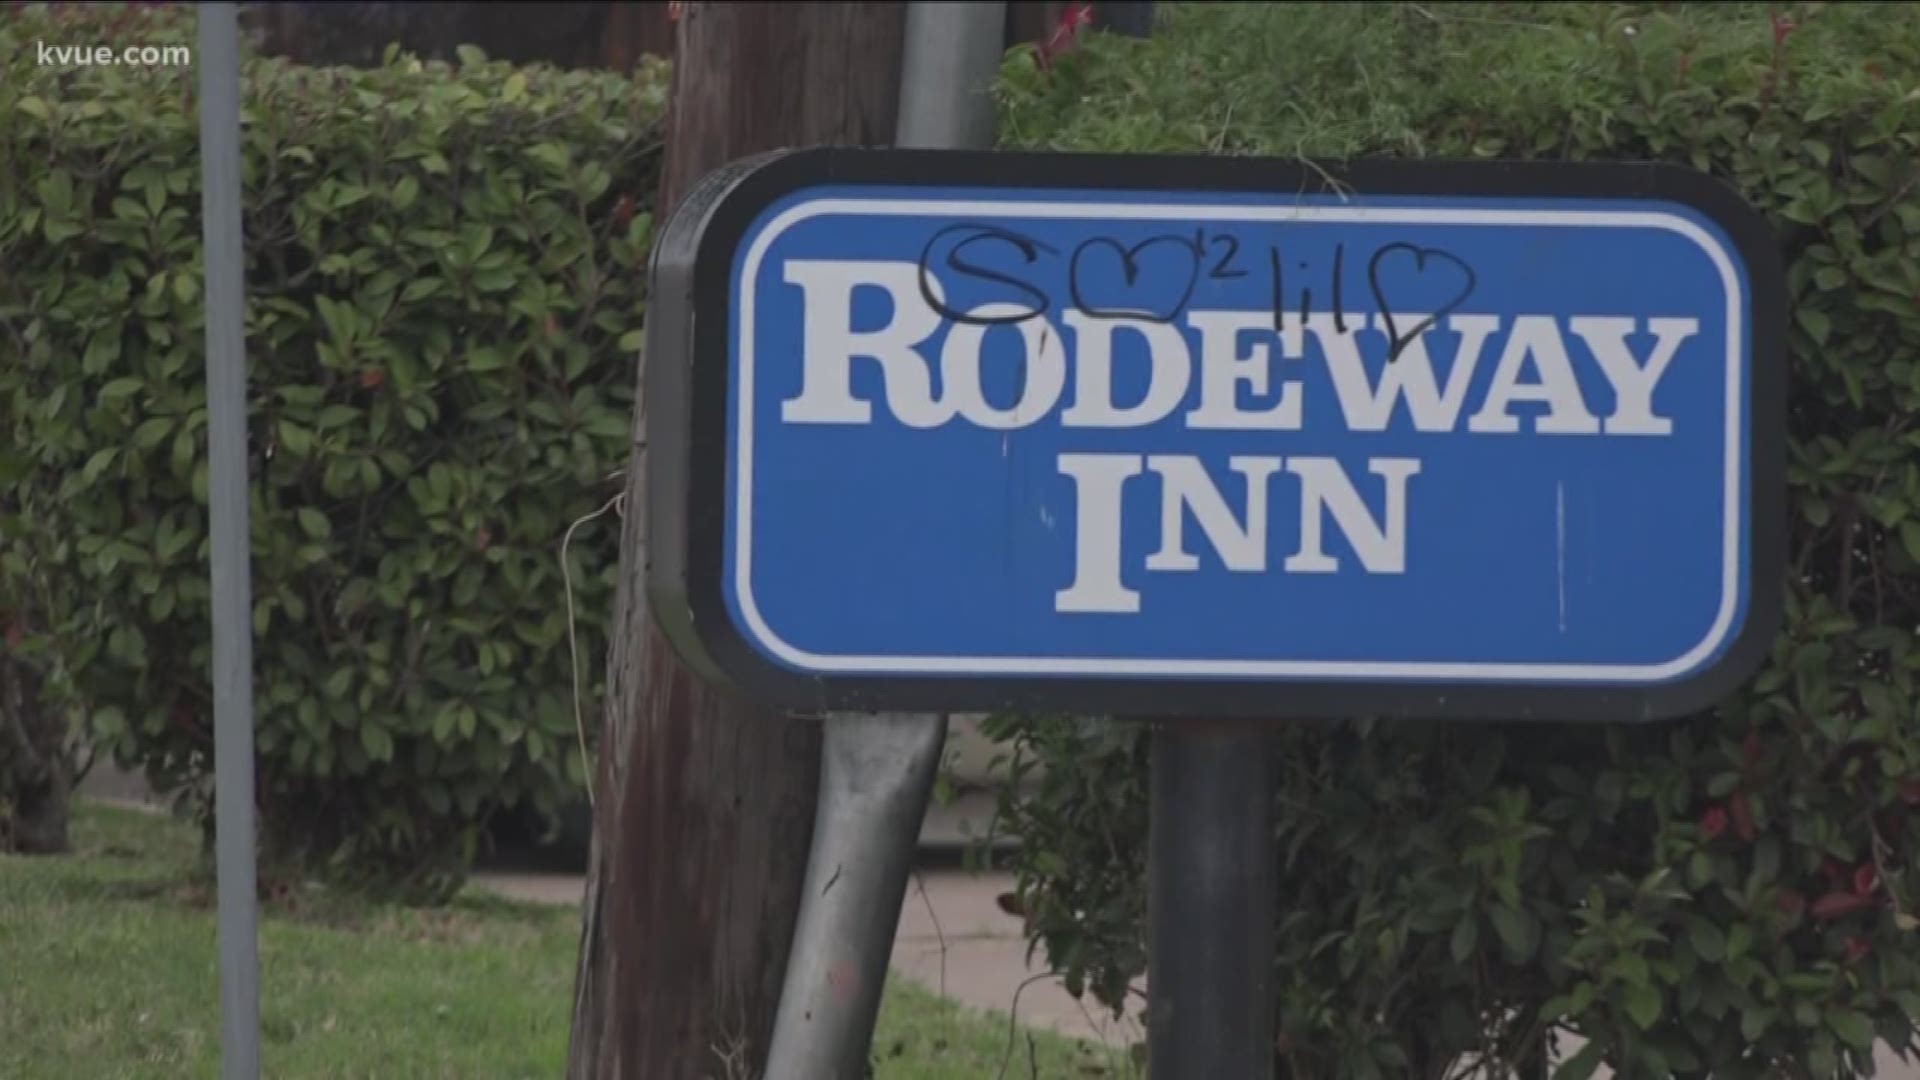 The council is considering spending money on the Rodeway Inn along I-35 near Oltorf. Mike Marut spoke with business owners in that area who don't like the idea.